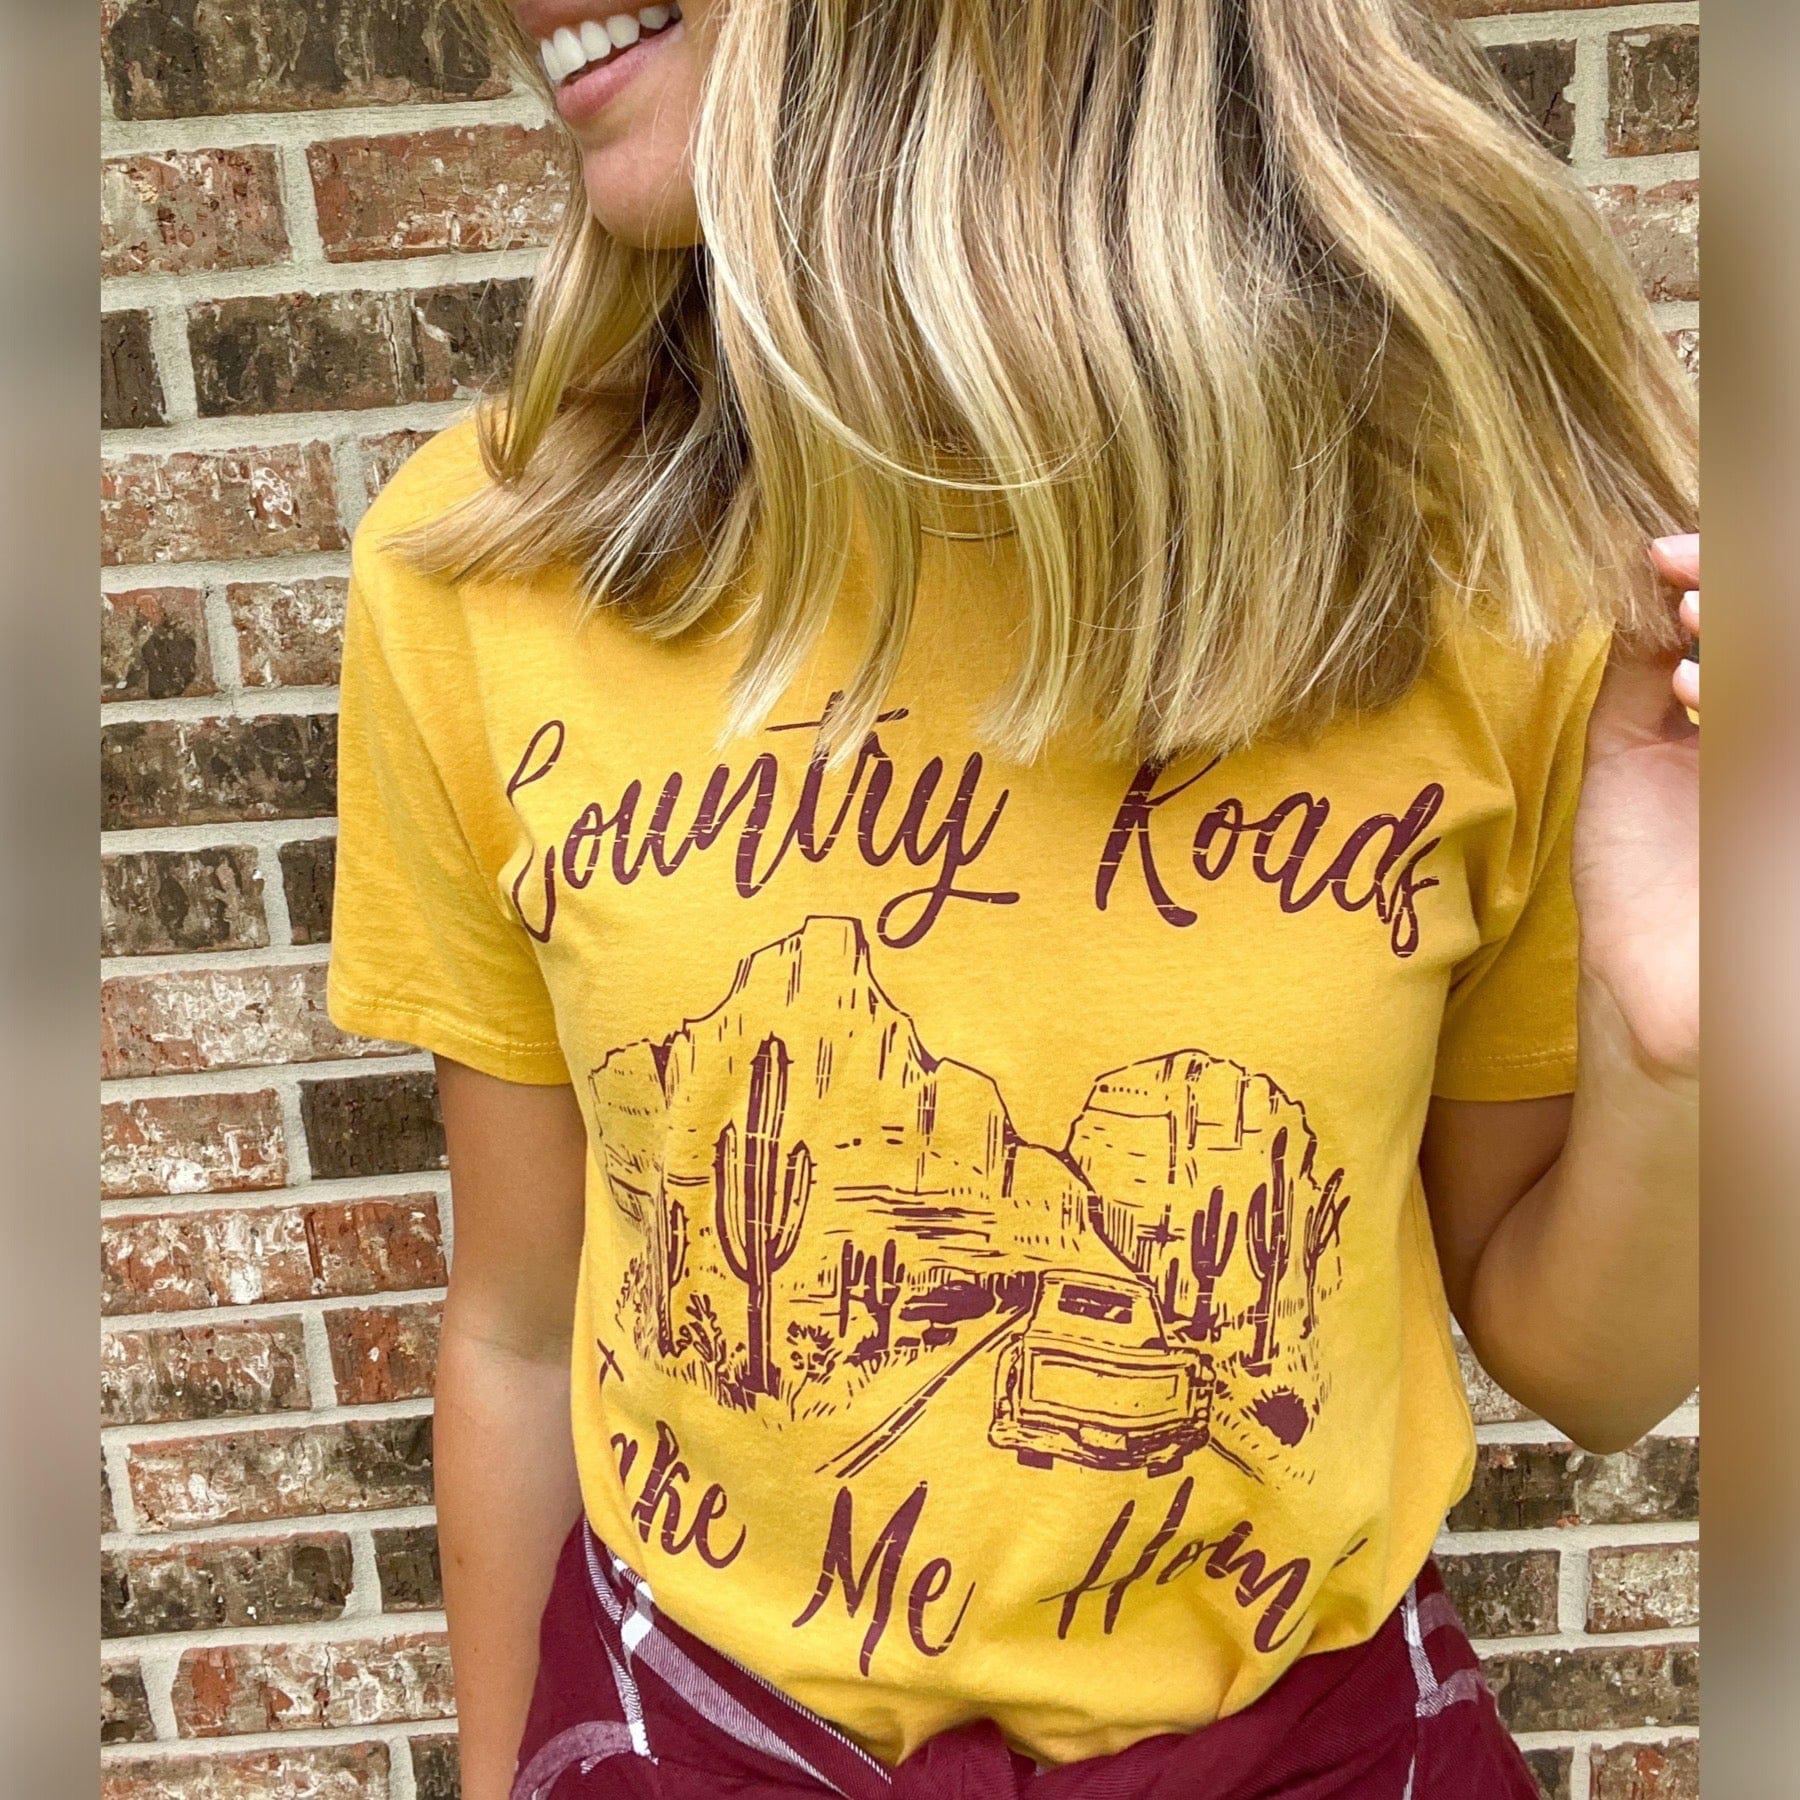 Envy Stylz Boutique Women - Apparel - Shirts - T-Shirts Country Roads, Take Me Home Graphic Tee